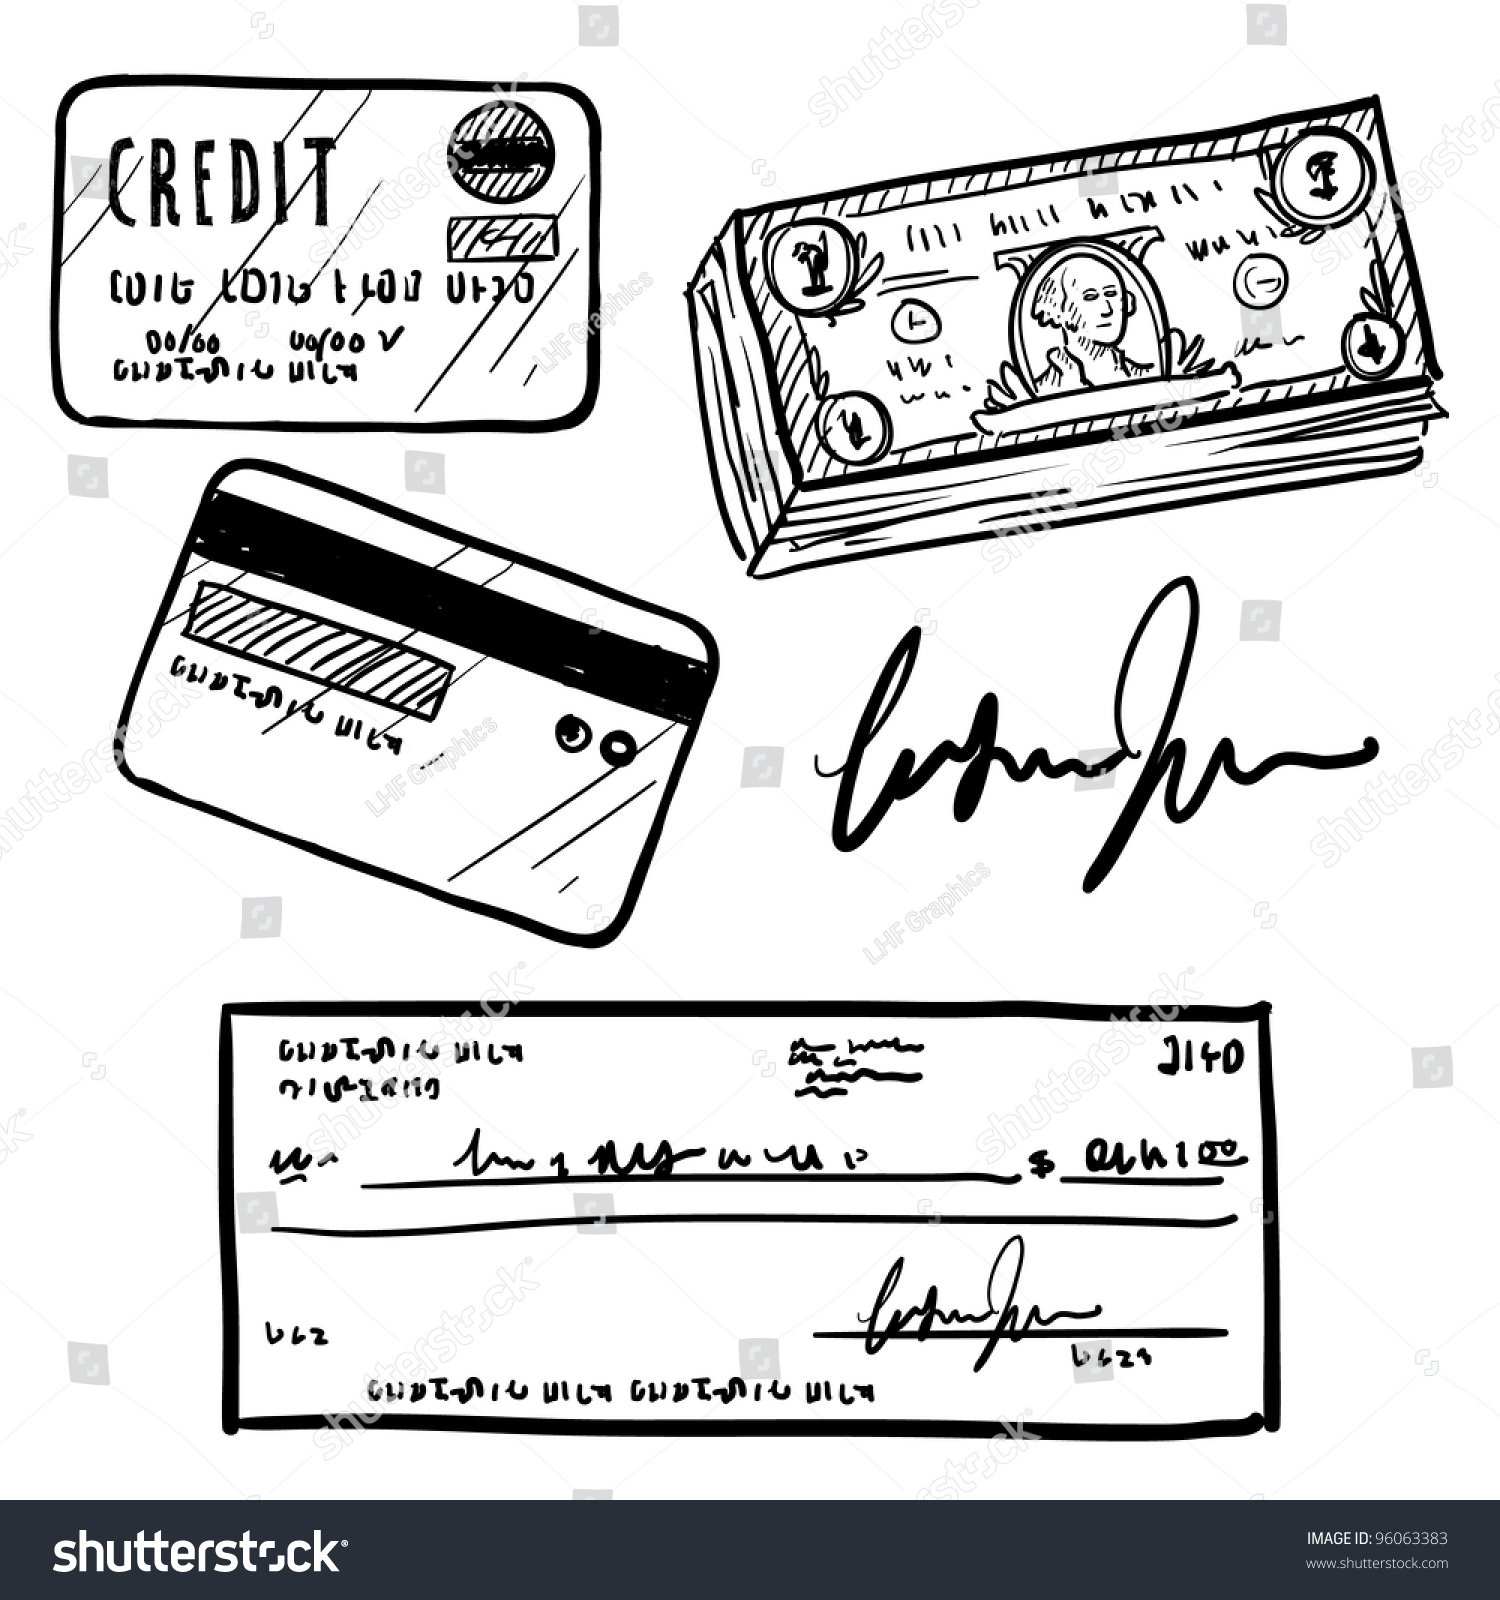 How To Draw A Credit Card MeaningKosh